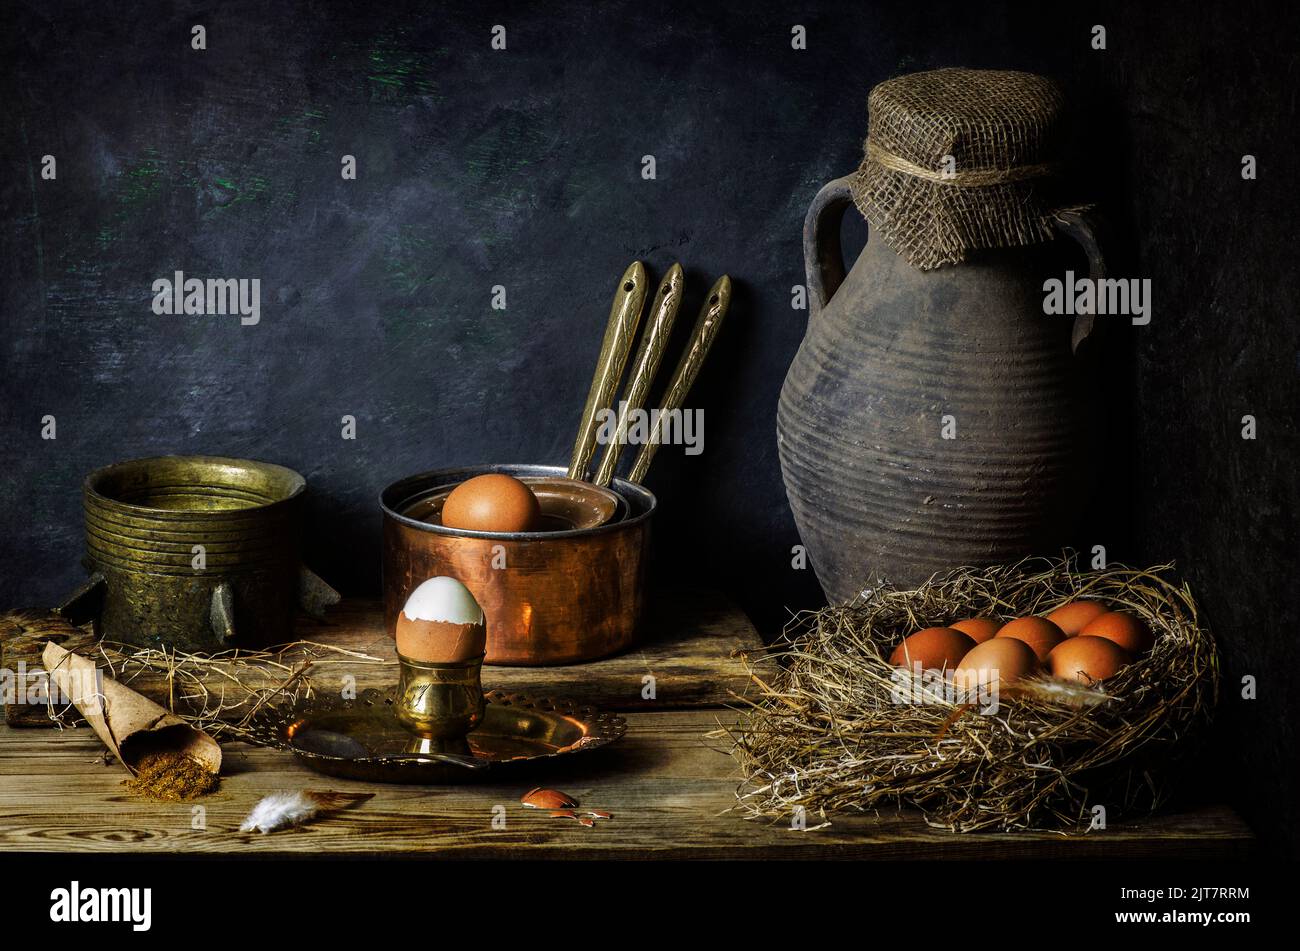 Classic still life with chicken eggs place in nest with old jar, copper pots and herbs on rustic wooden background. Stock Photo